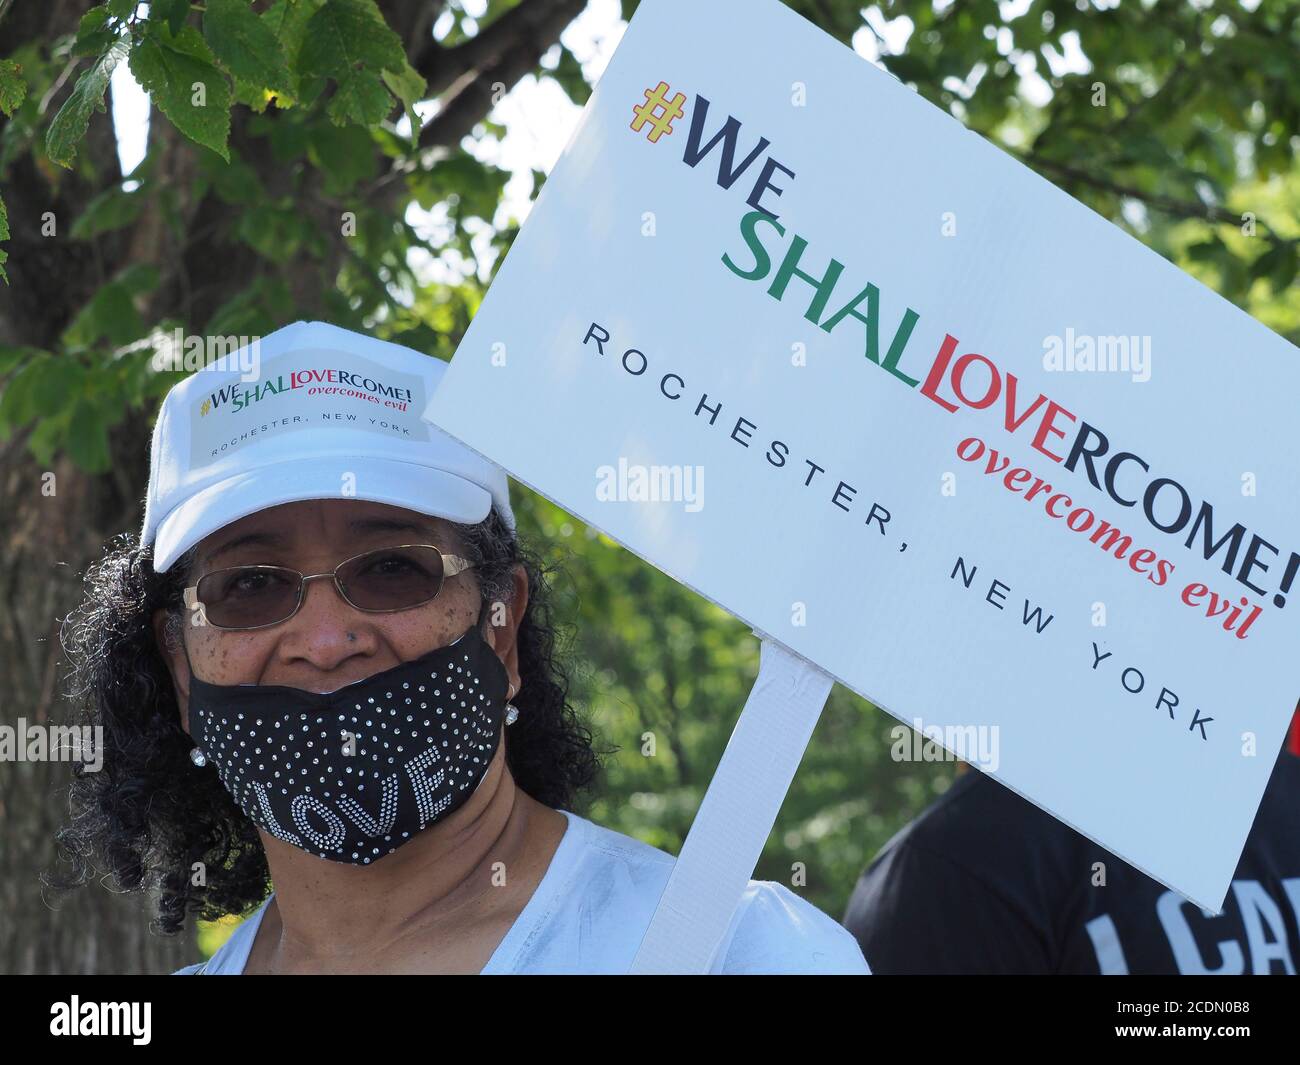 Washington, District of Columbia, USA. 28th Aug, 2020. Thousands came from across the nation to participate in the March on Washington 2020, 57 years after the historic 1963 march. Credit: Sue Dorfman/ZUMA Wire/Alamy Live News Stock Photo